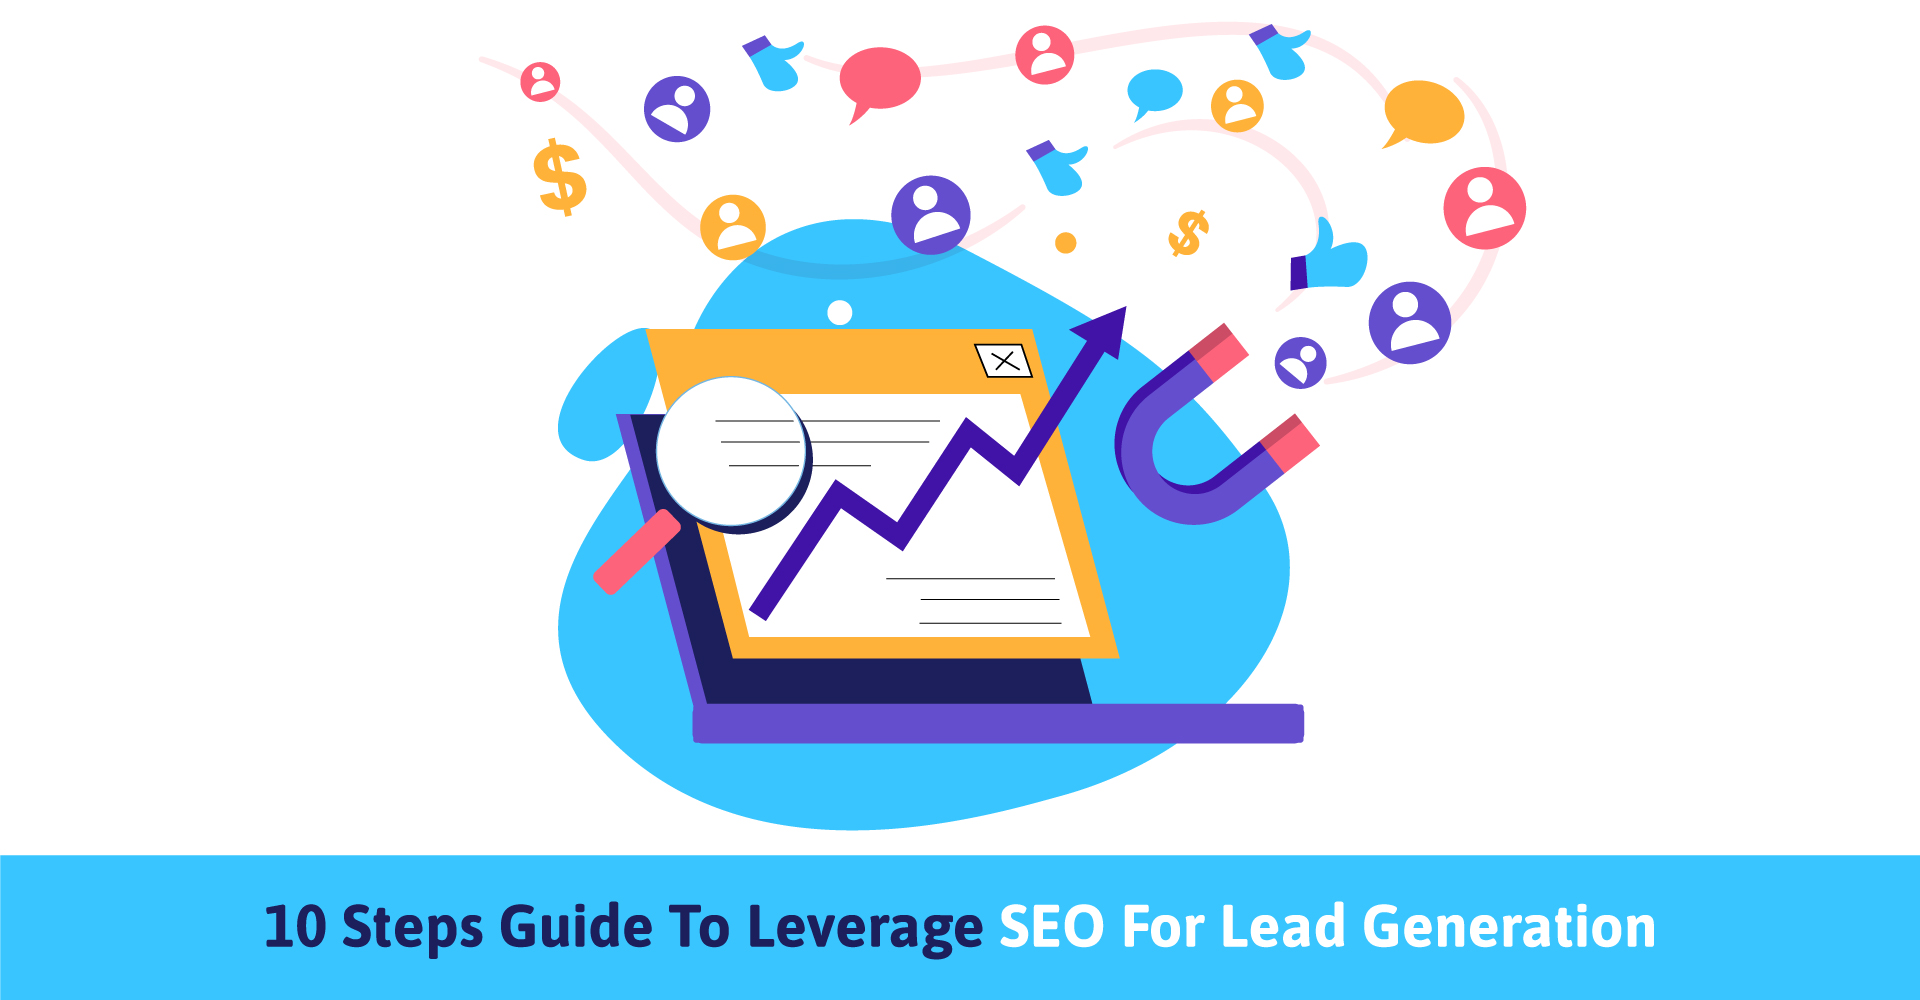 10 Steps Guide To Leverage SEO For Lead Generation - Rise Socially